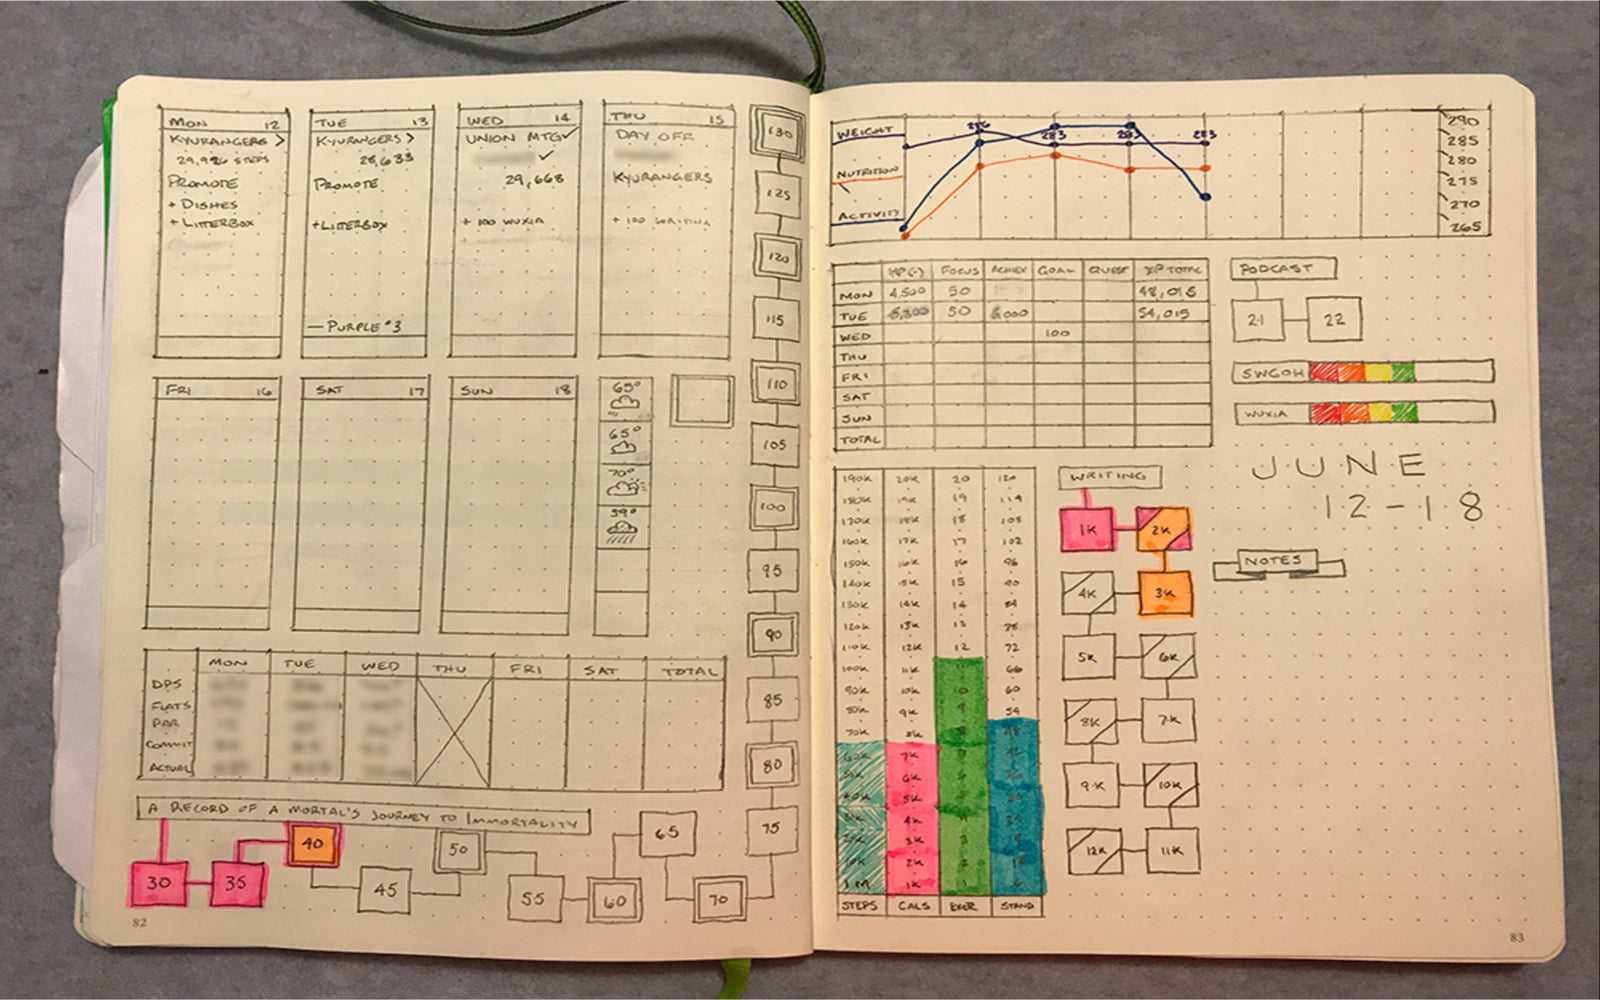 Gamify Your Life With a BuJo RPG - Bullet Journal